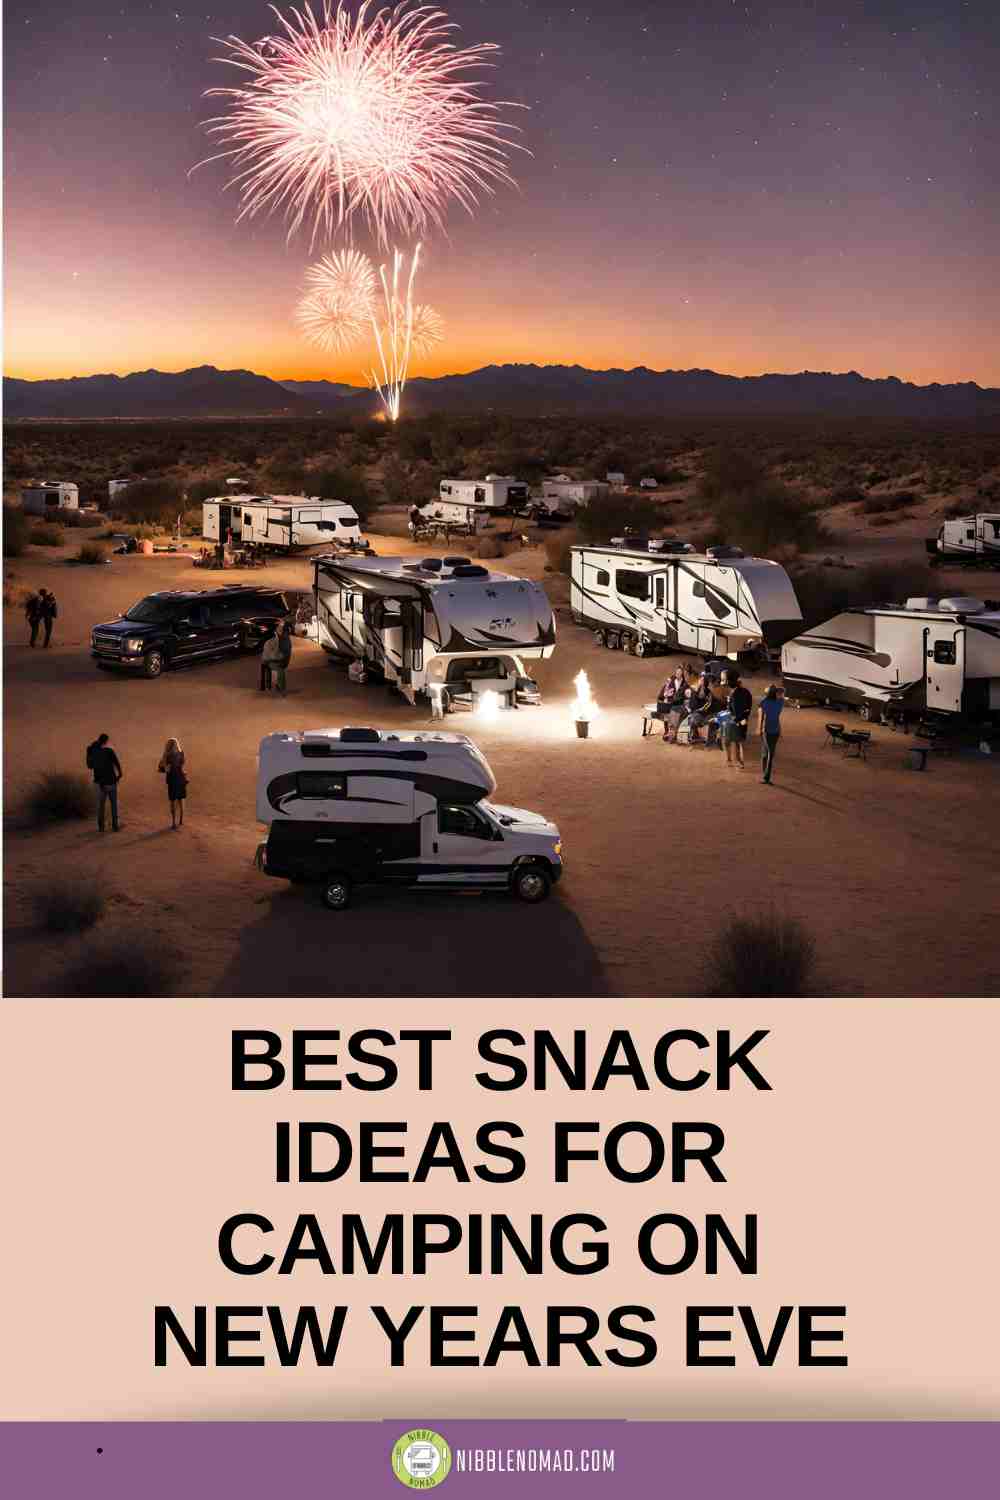 Best Sack ideas for camping on new years eve